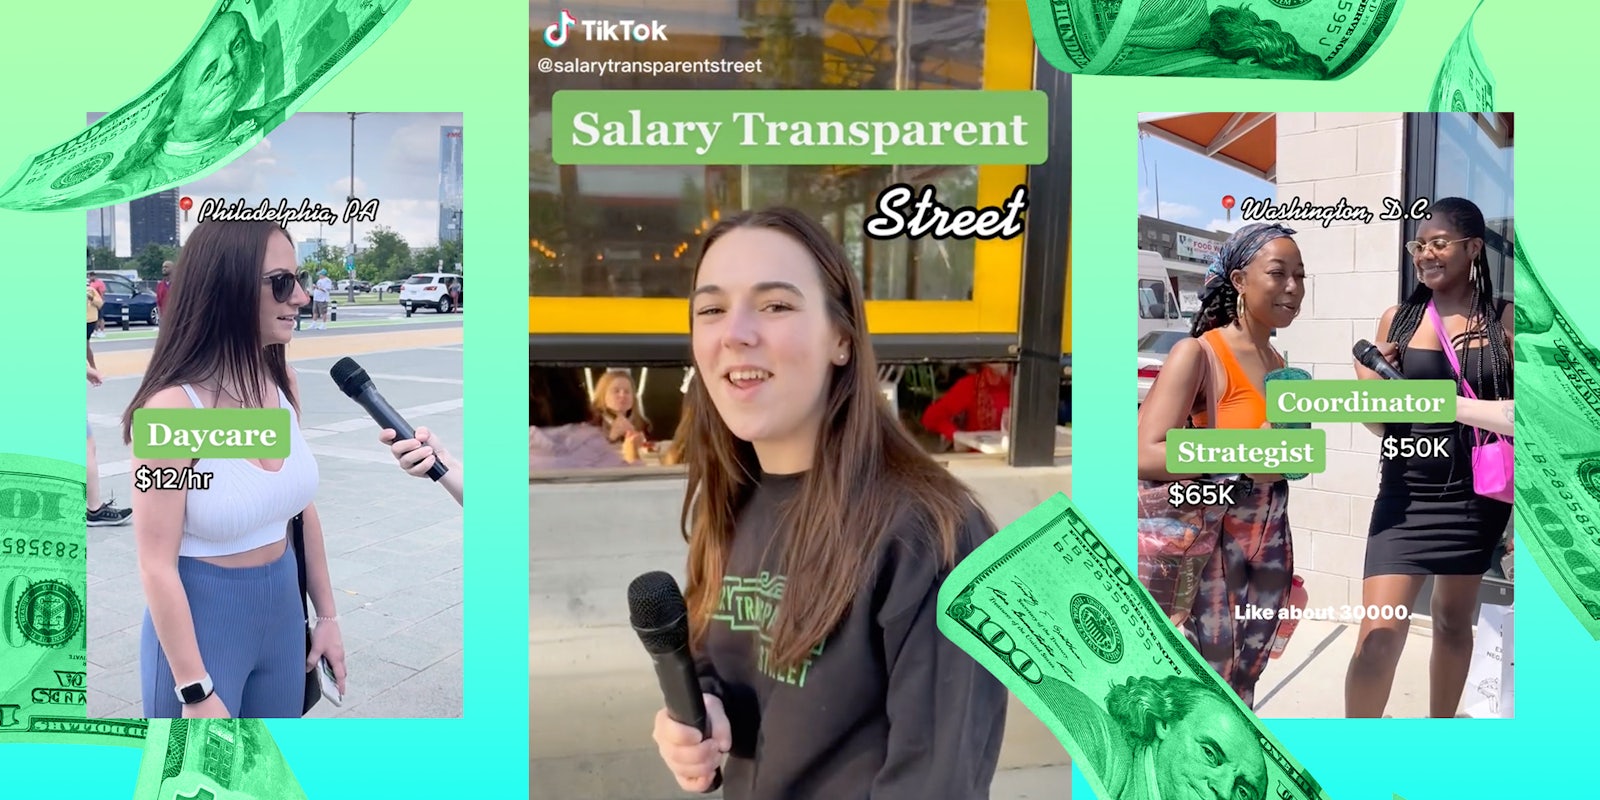 Salary Transparency Street TikTok account asking people how much they make